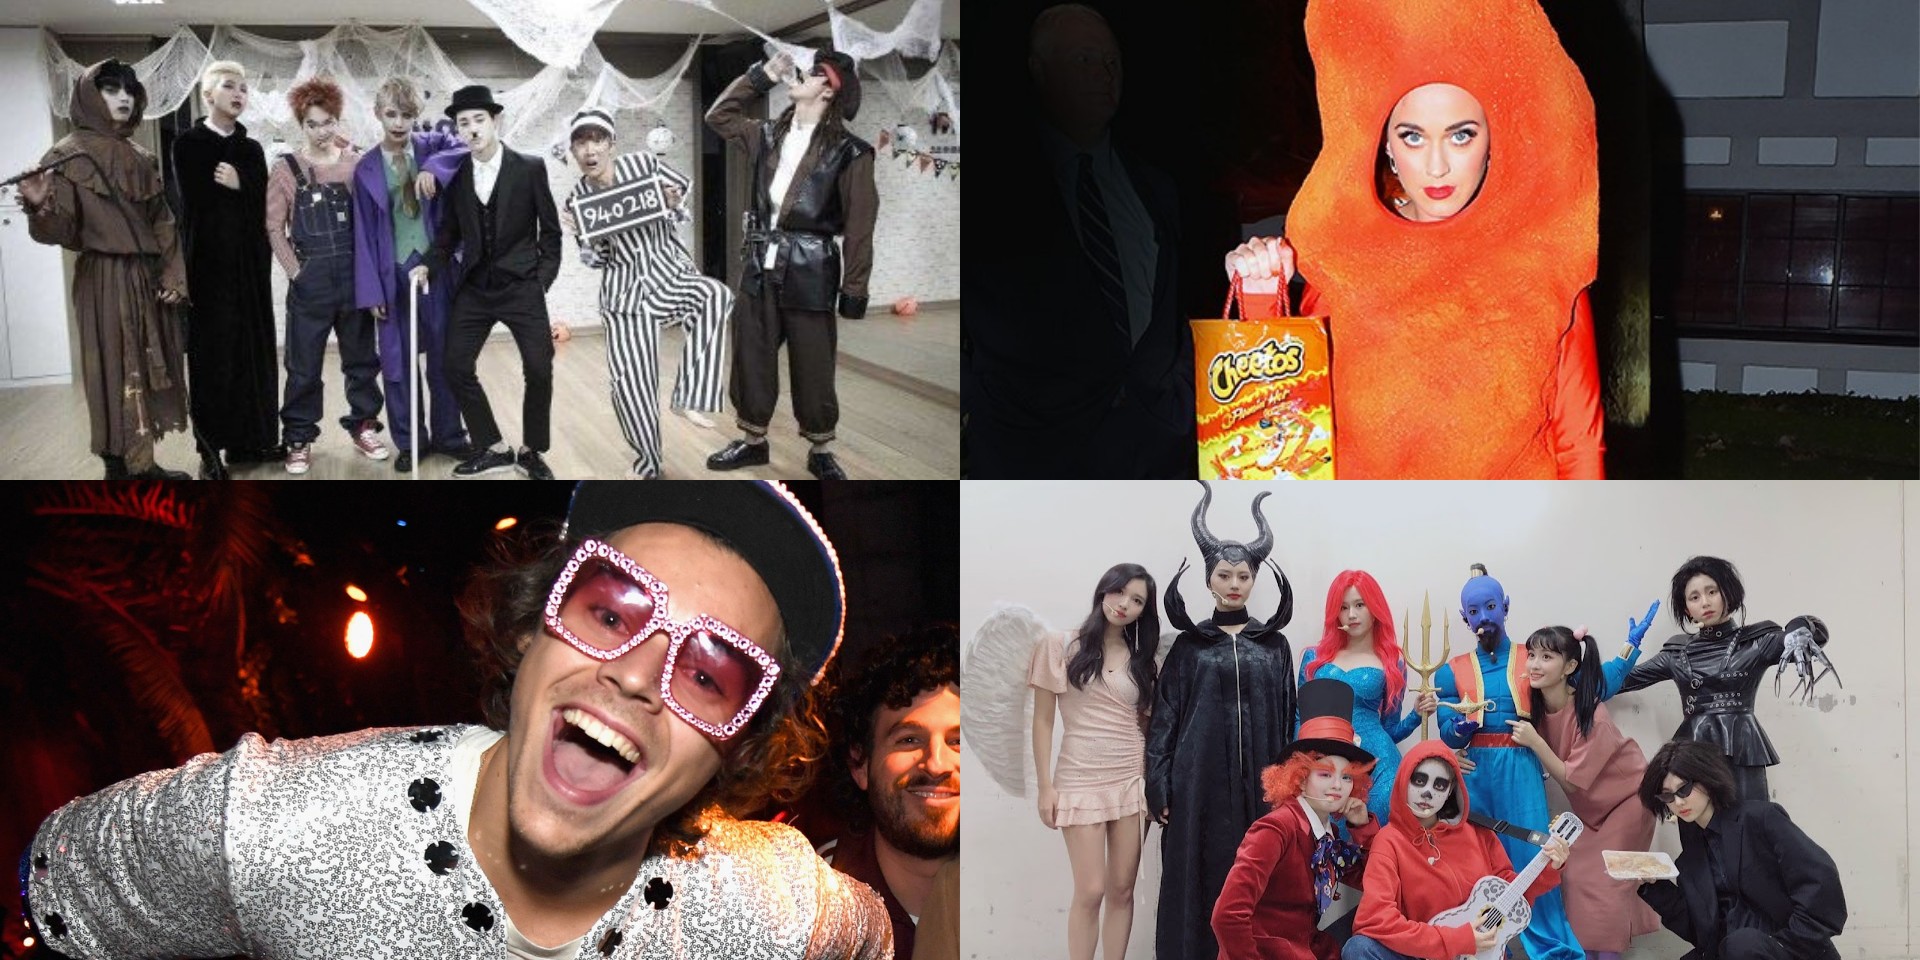 10 Halloween costume ideas featuring BTS, Harry Styles, TWICE, Katy Perry, and more